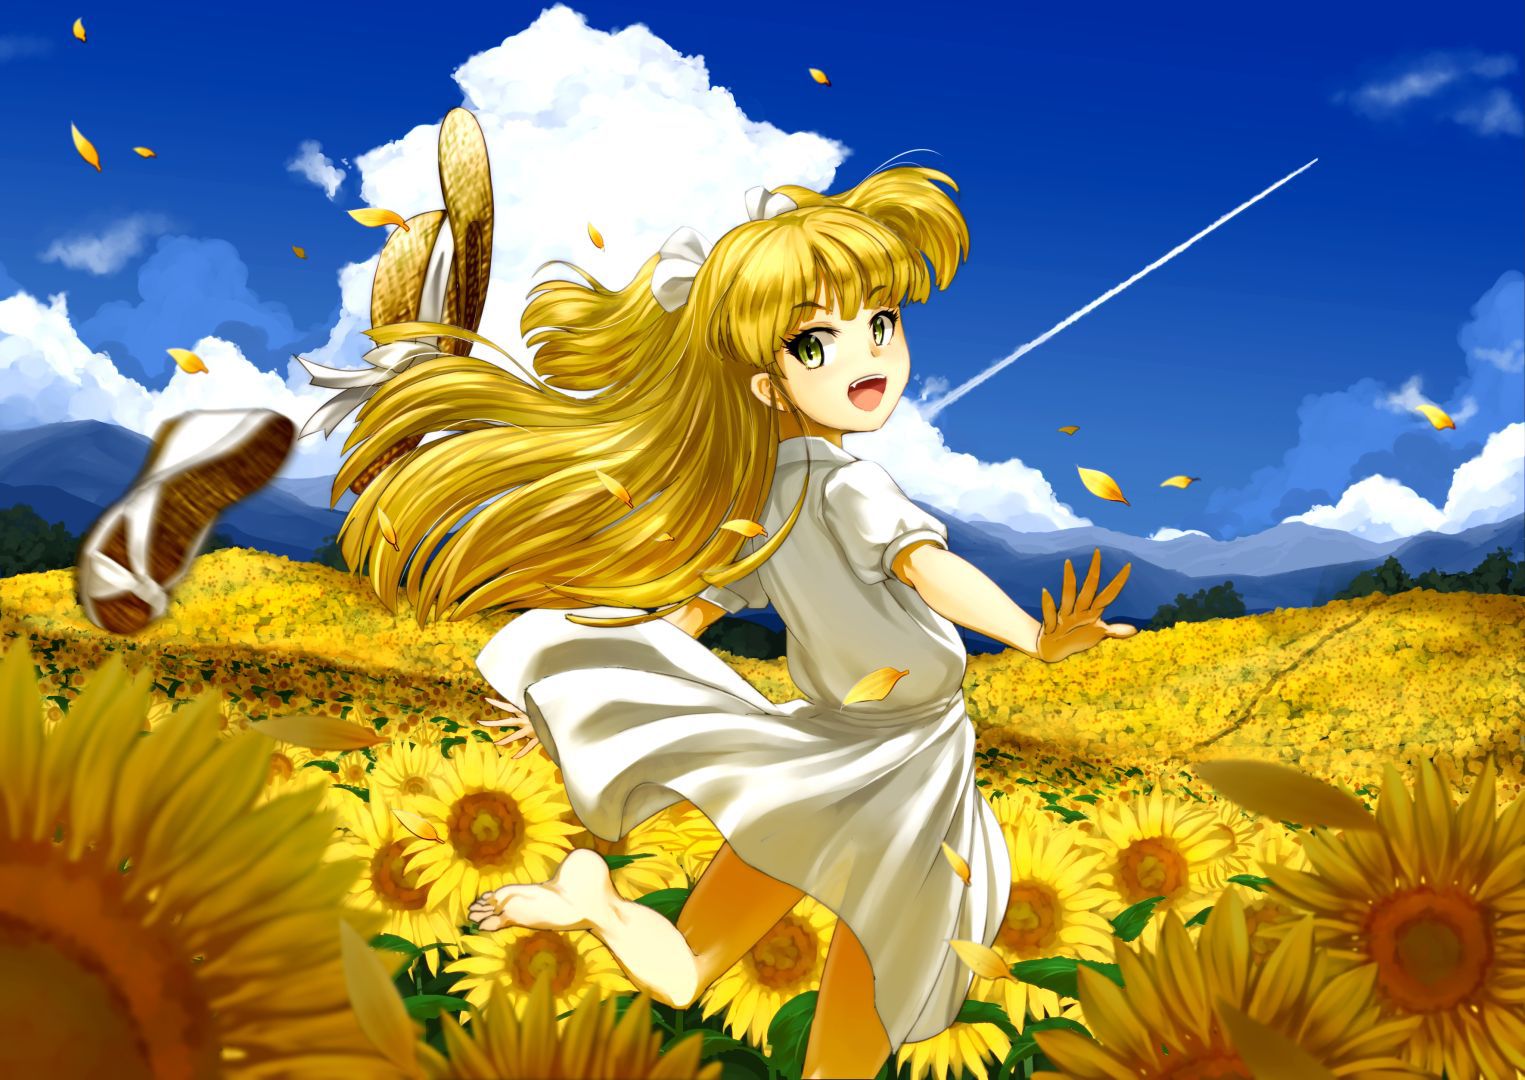 [Secondary, ZIP] summer 2: girl with a sunflower or image summary 17